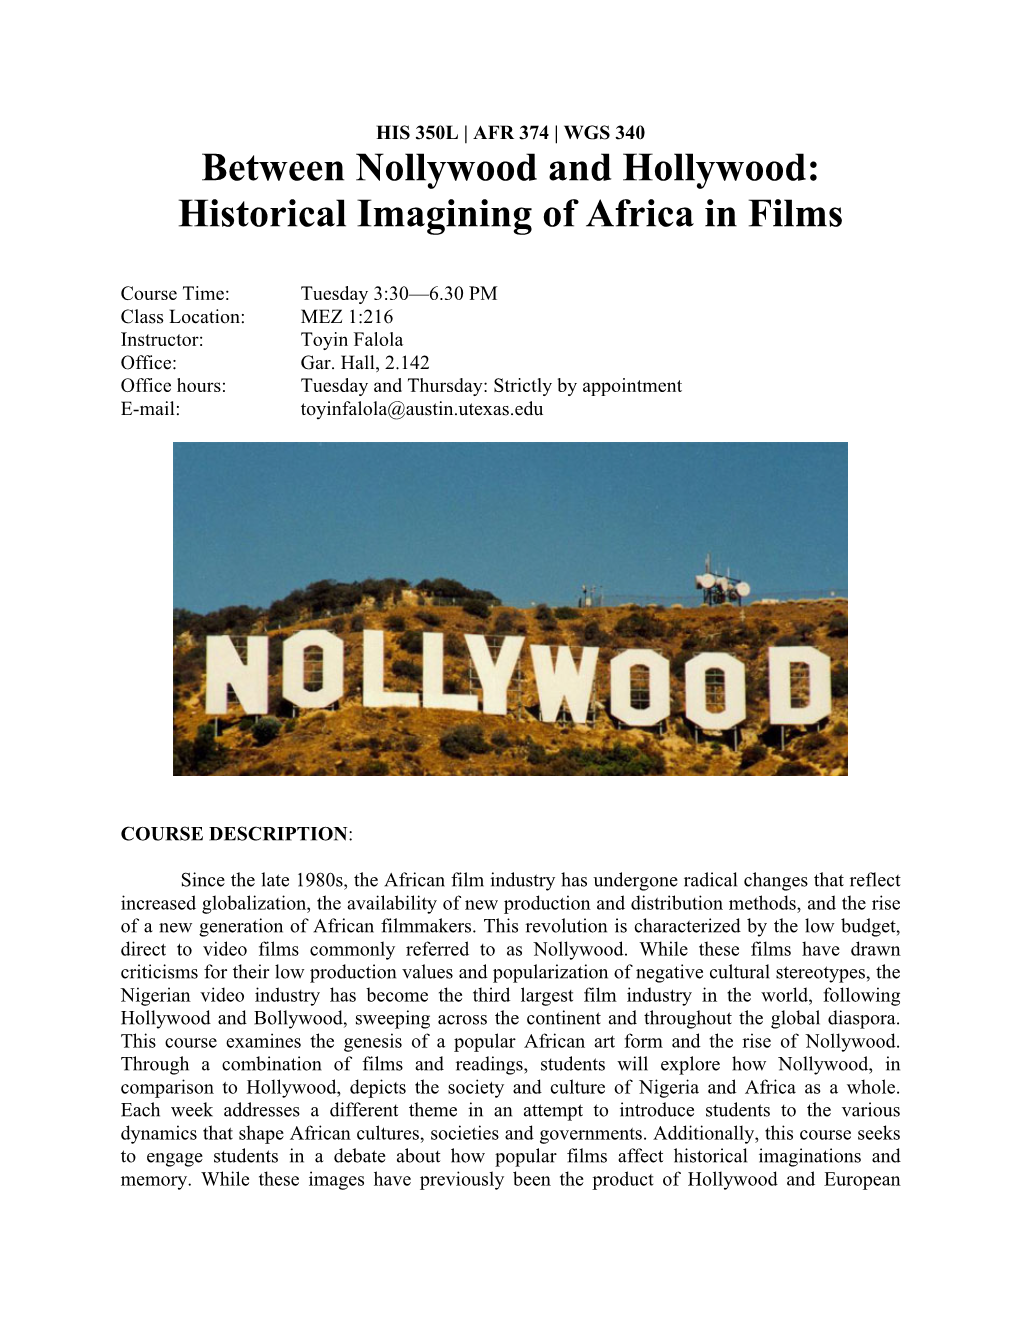 Between Nollywood and Hollywood: Historical Imagining of Africa in Films